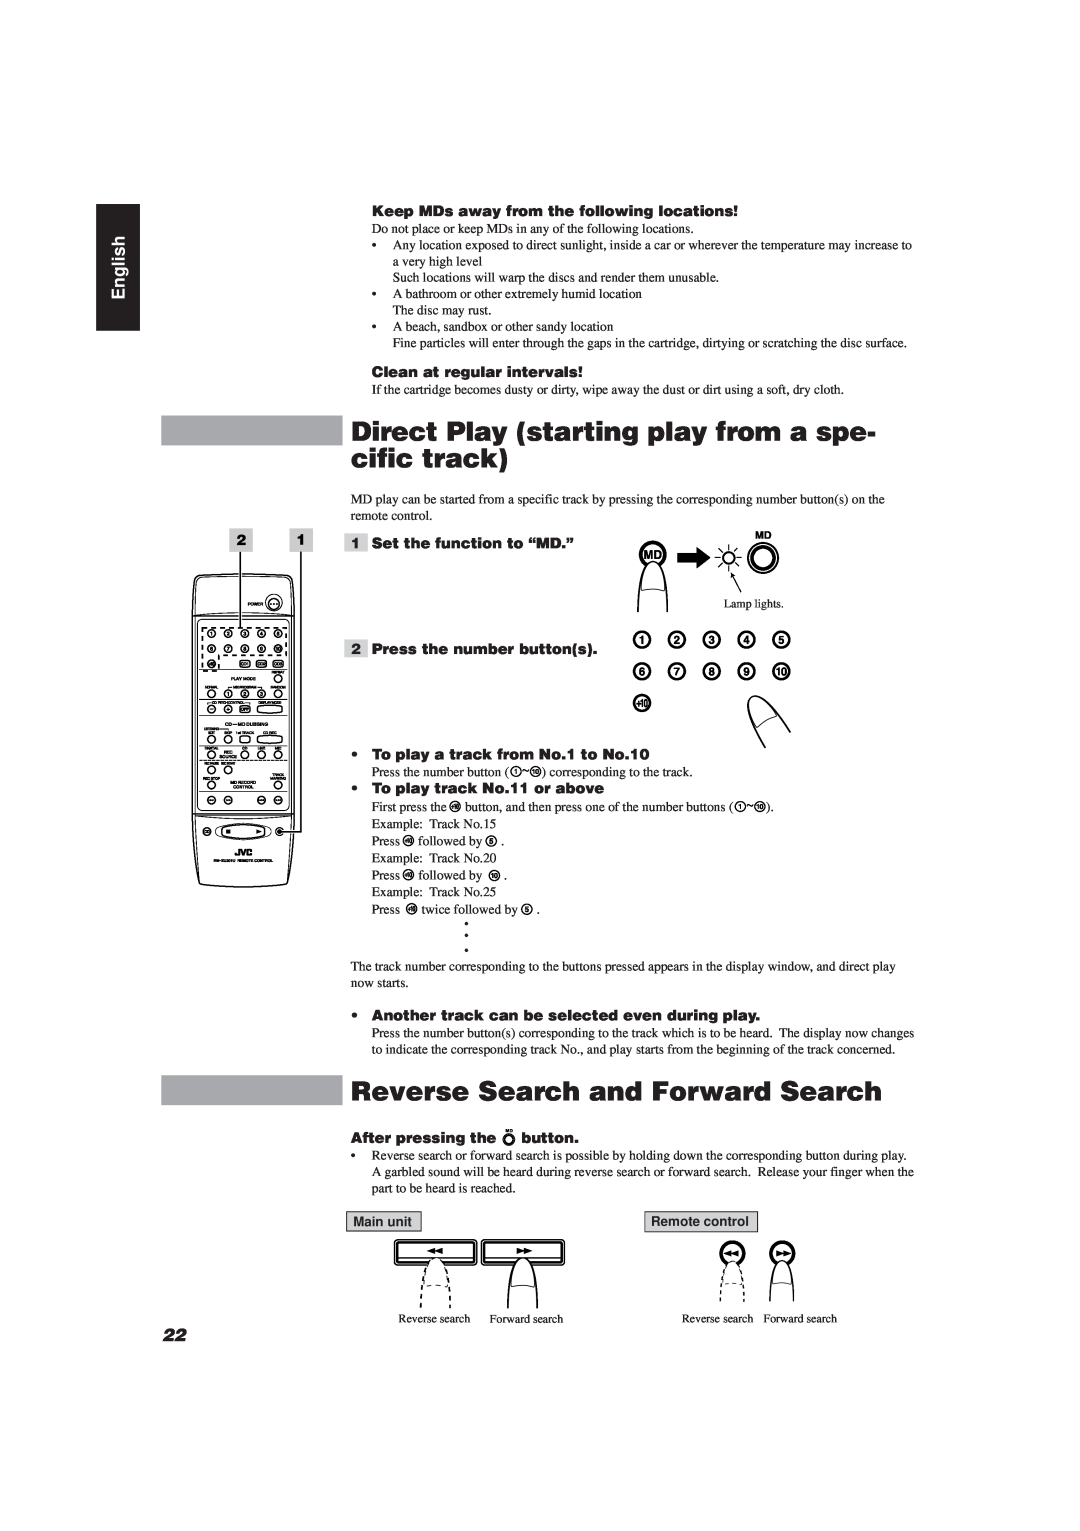 JVC XU-301BK manual Direct Play starting play from a spe- cific track, Reverse Search and Forward Search, English 